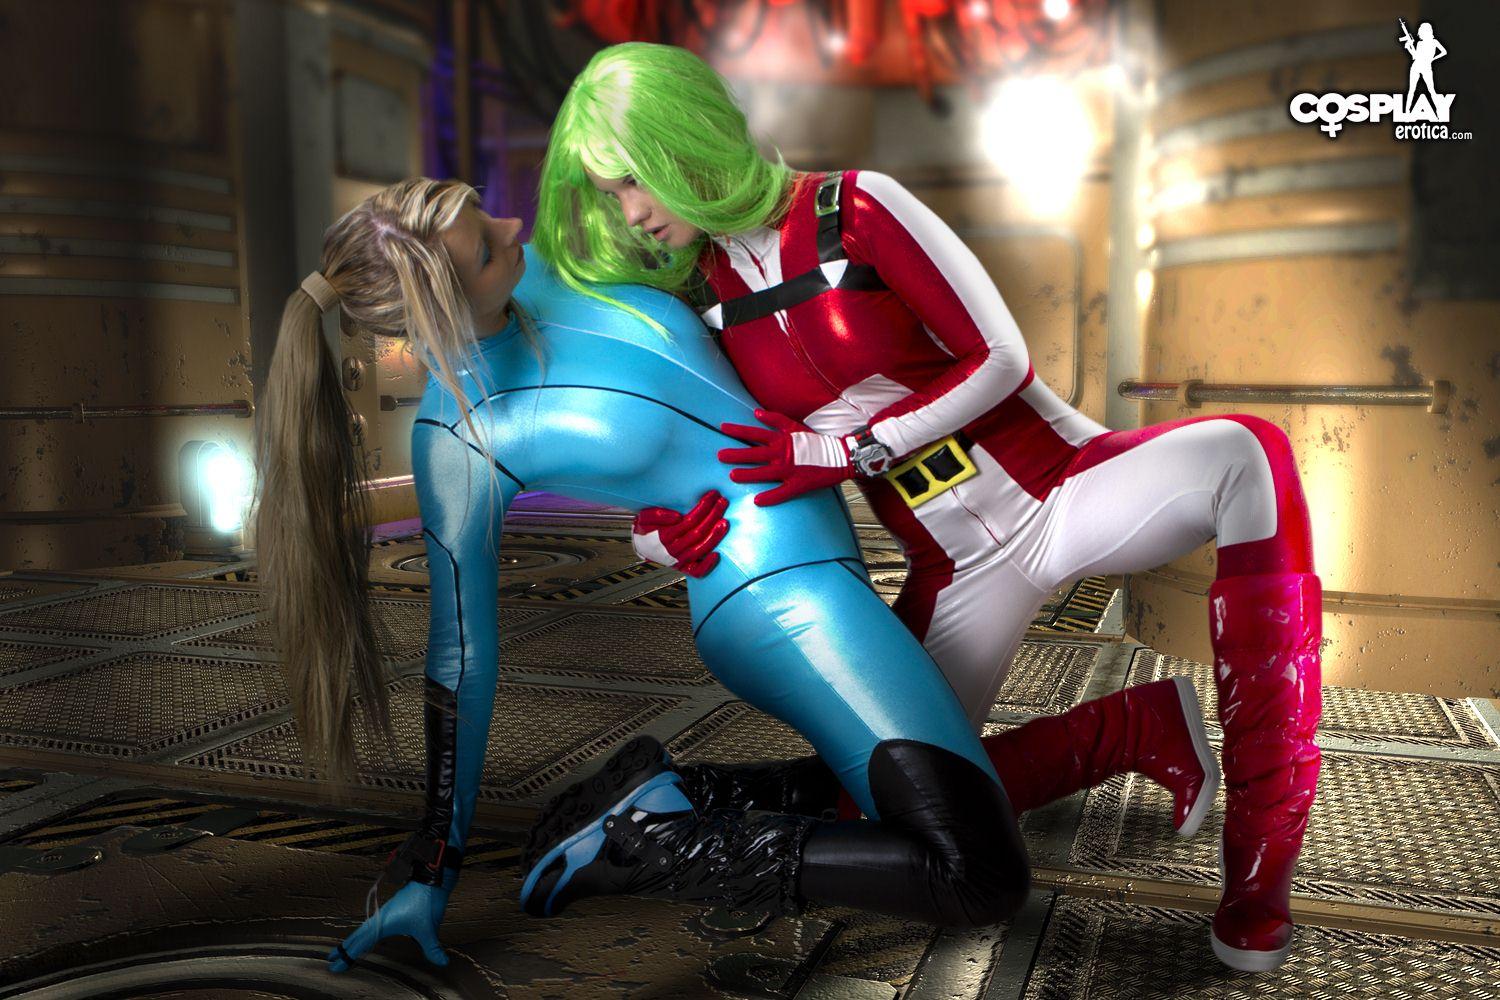 Cosplayers Sandy Bell and Ginger dress up as Metroid characters and get it on #54531276